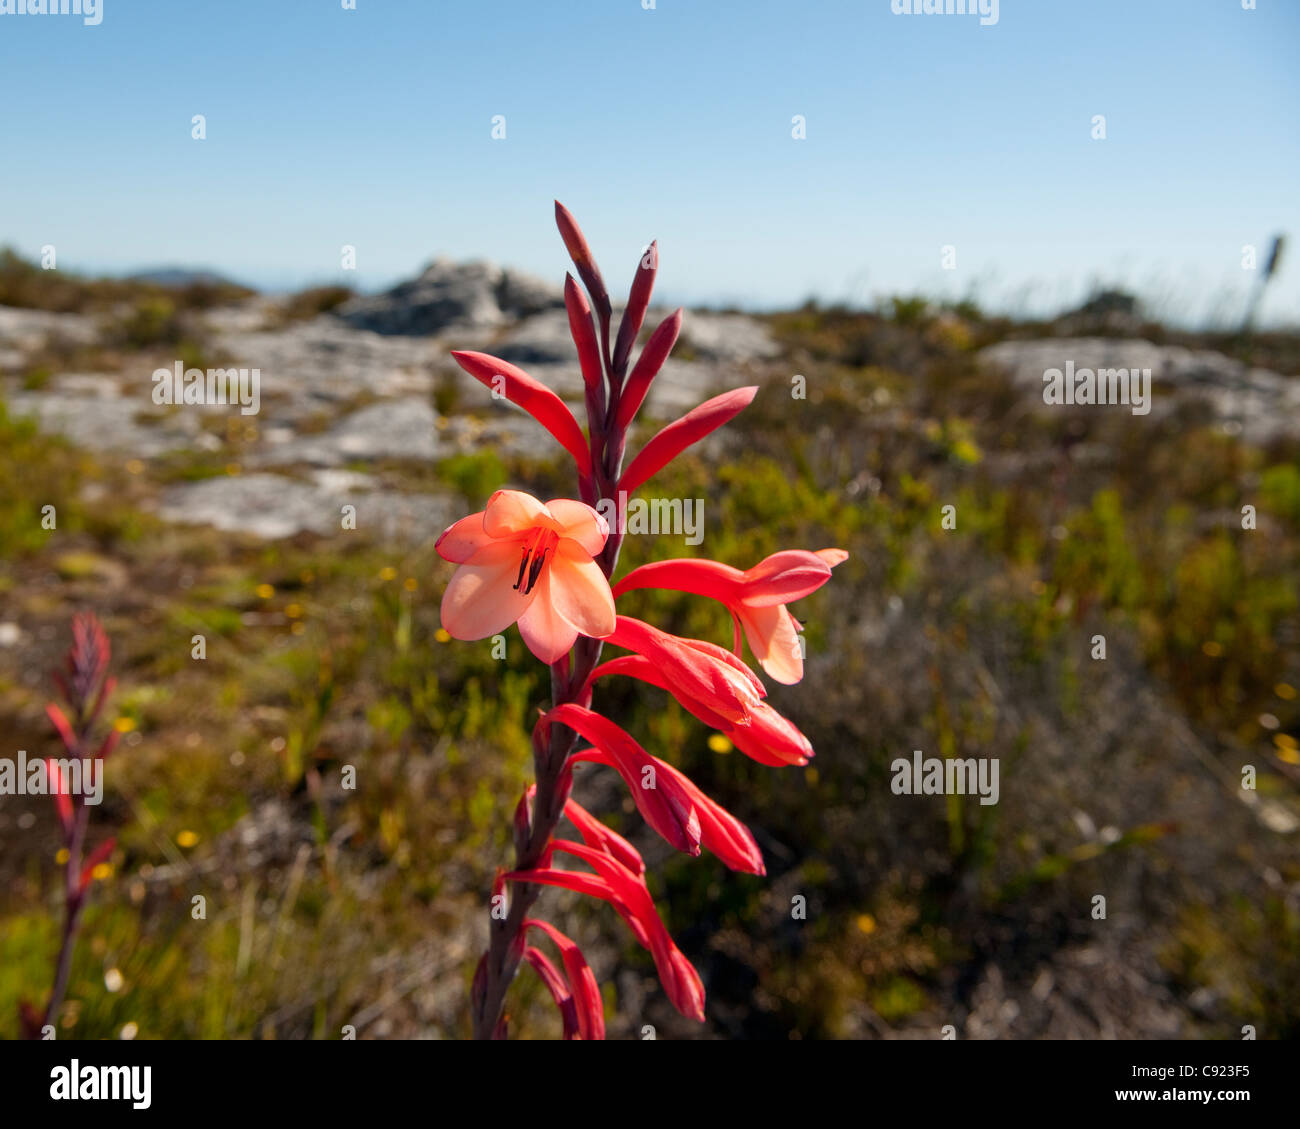 Watsonia Tabularis or the Table Mountain Watsonia is a hardy flowering group of plants common to the niche environment of Table Stock Photo